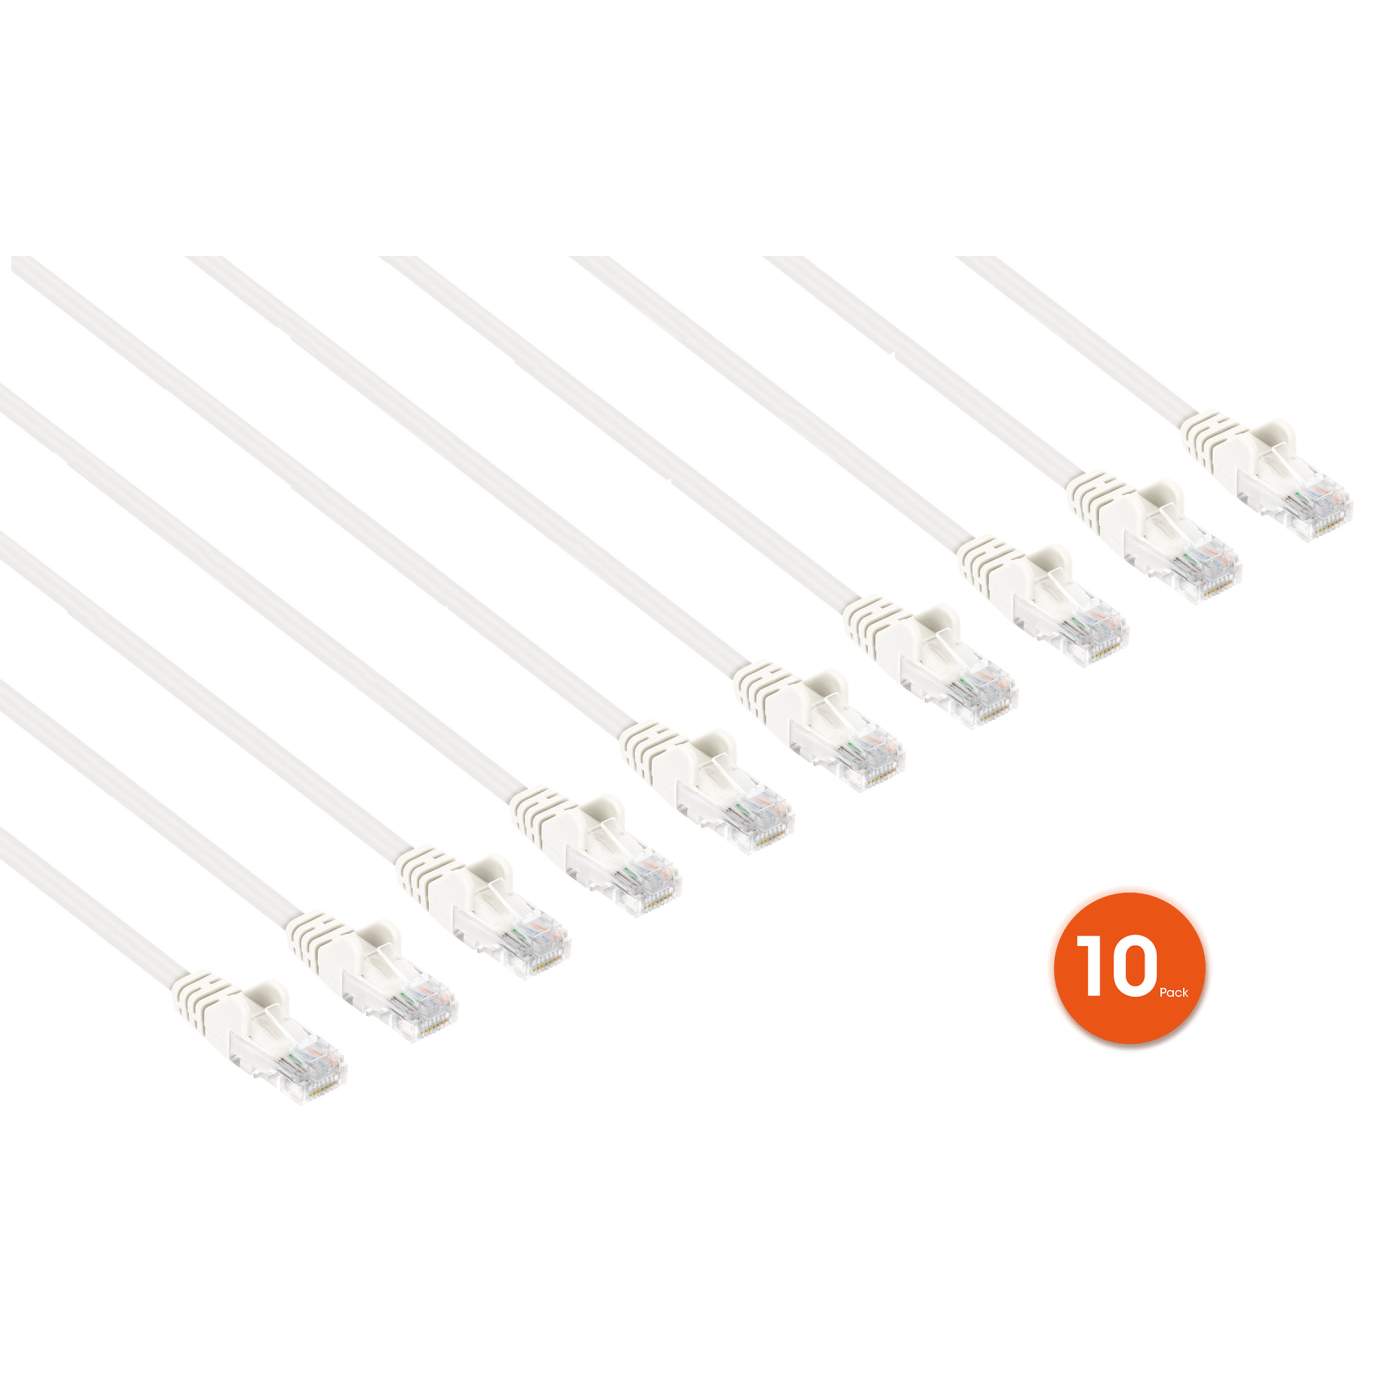 Cat6 U/UTP Slim Network Patch Cable, 14 ft., White, 10-Pack Image 2